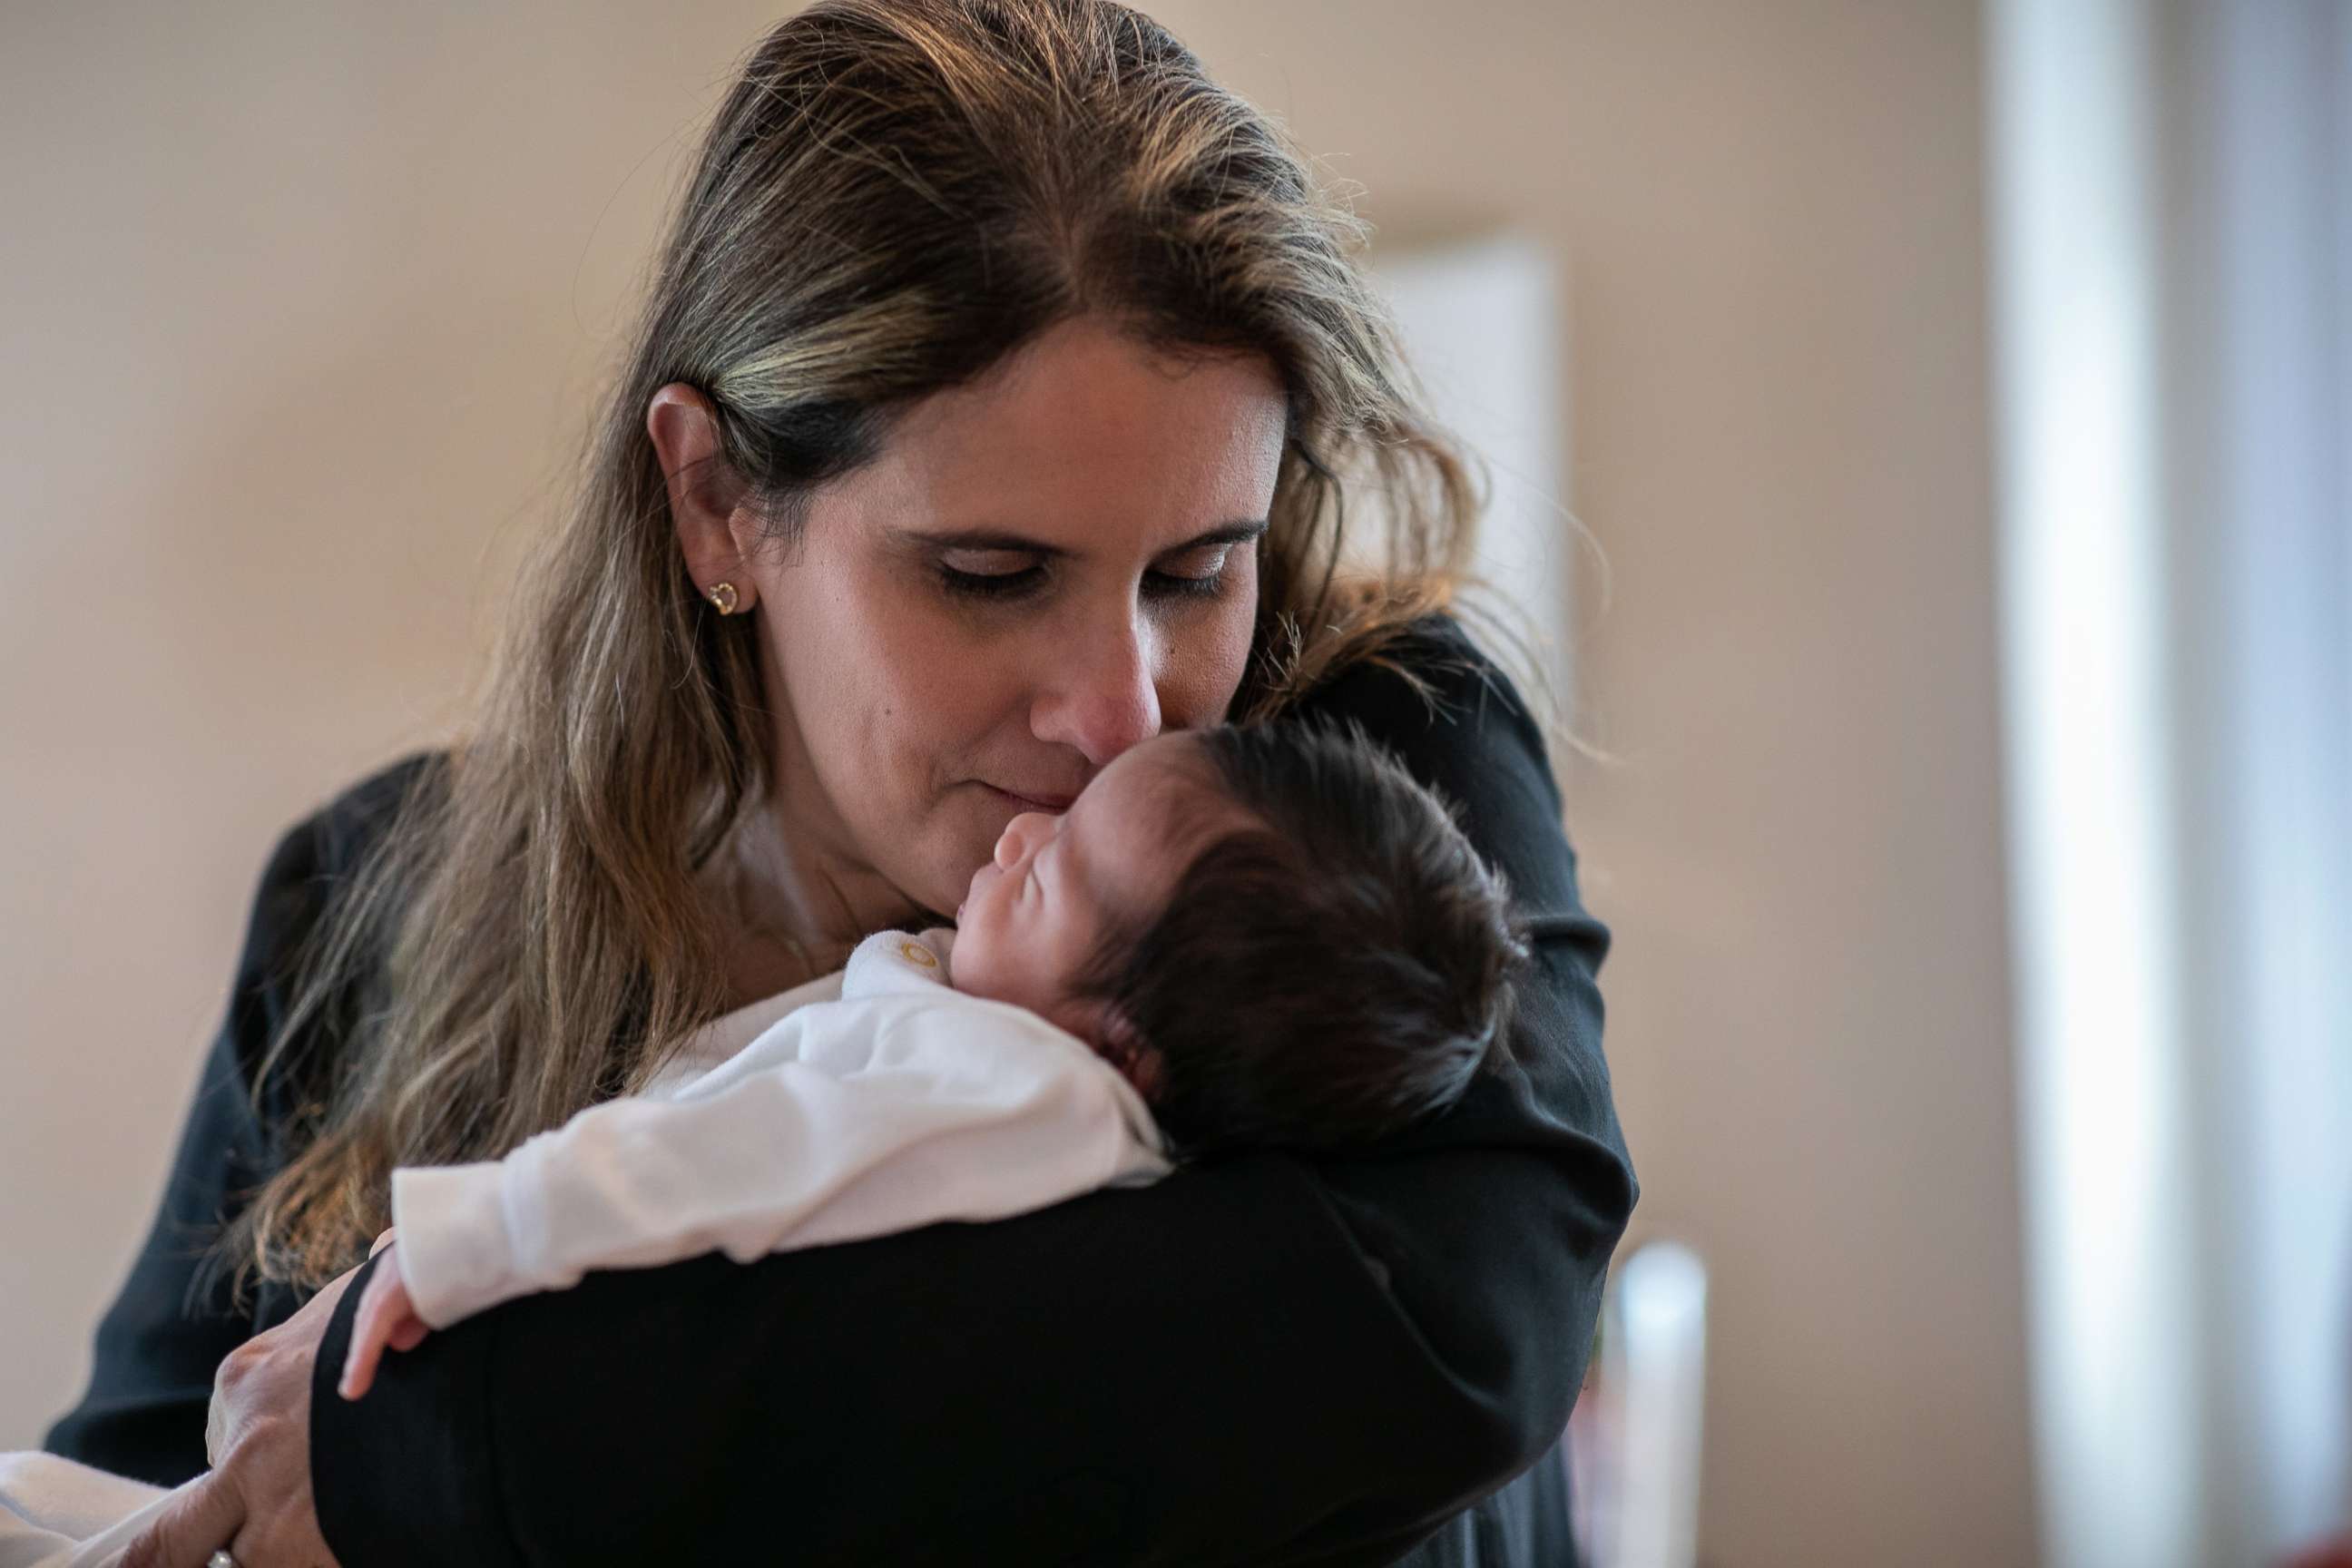 PHOTO: Stamford Elementary school teacher Luciana Lira, 32, kisses Neysel before showing the newborn for the first time to his immigrant mother Zully, a Guatemalan asylum seeker, and her son Junior, 7,  via Zoom on April 20, 2020, in Stamford, Conn.